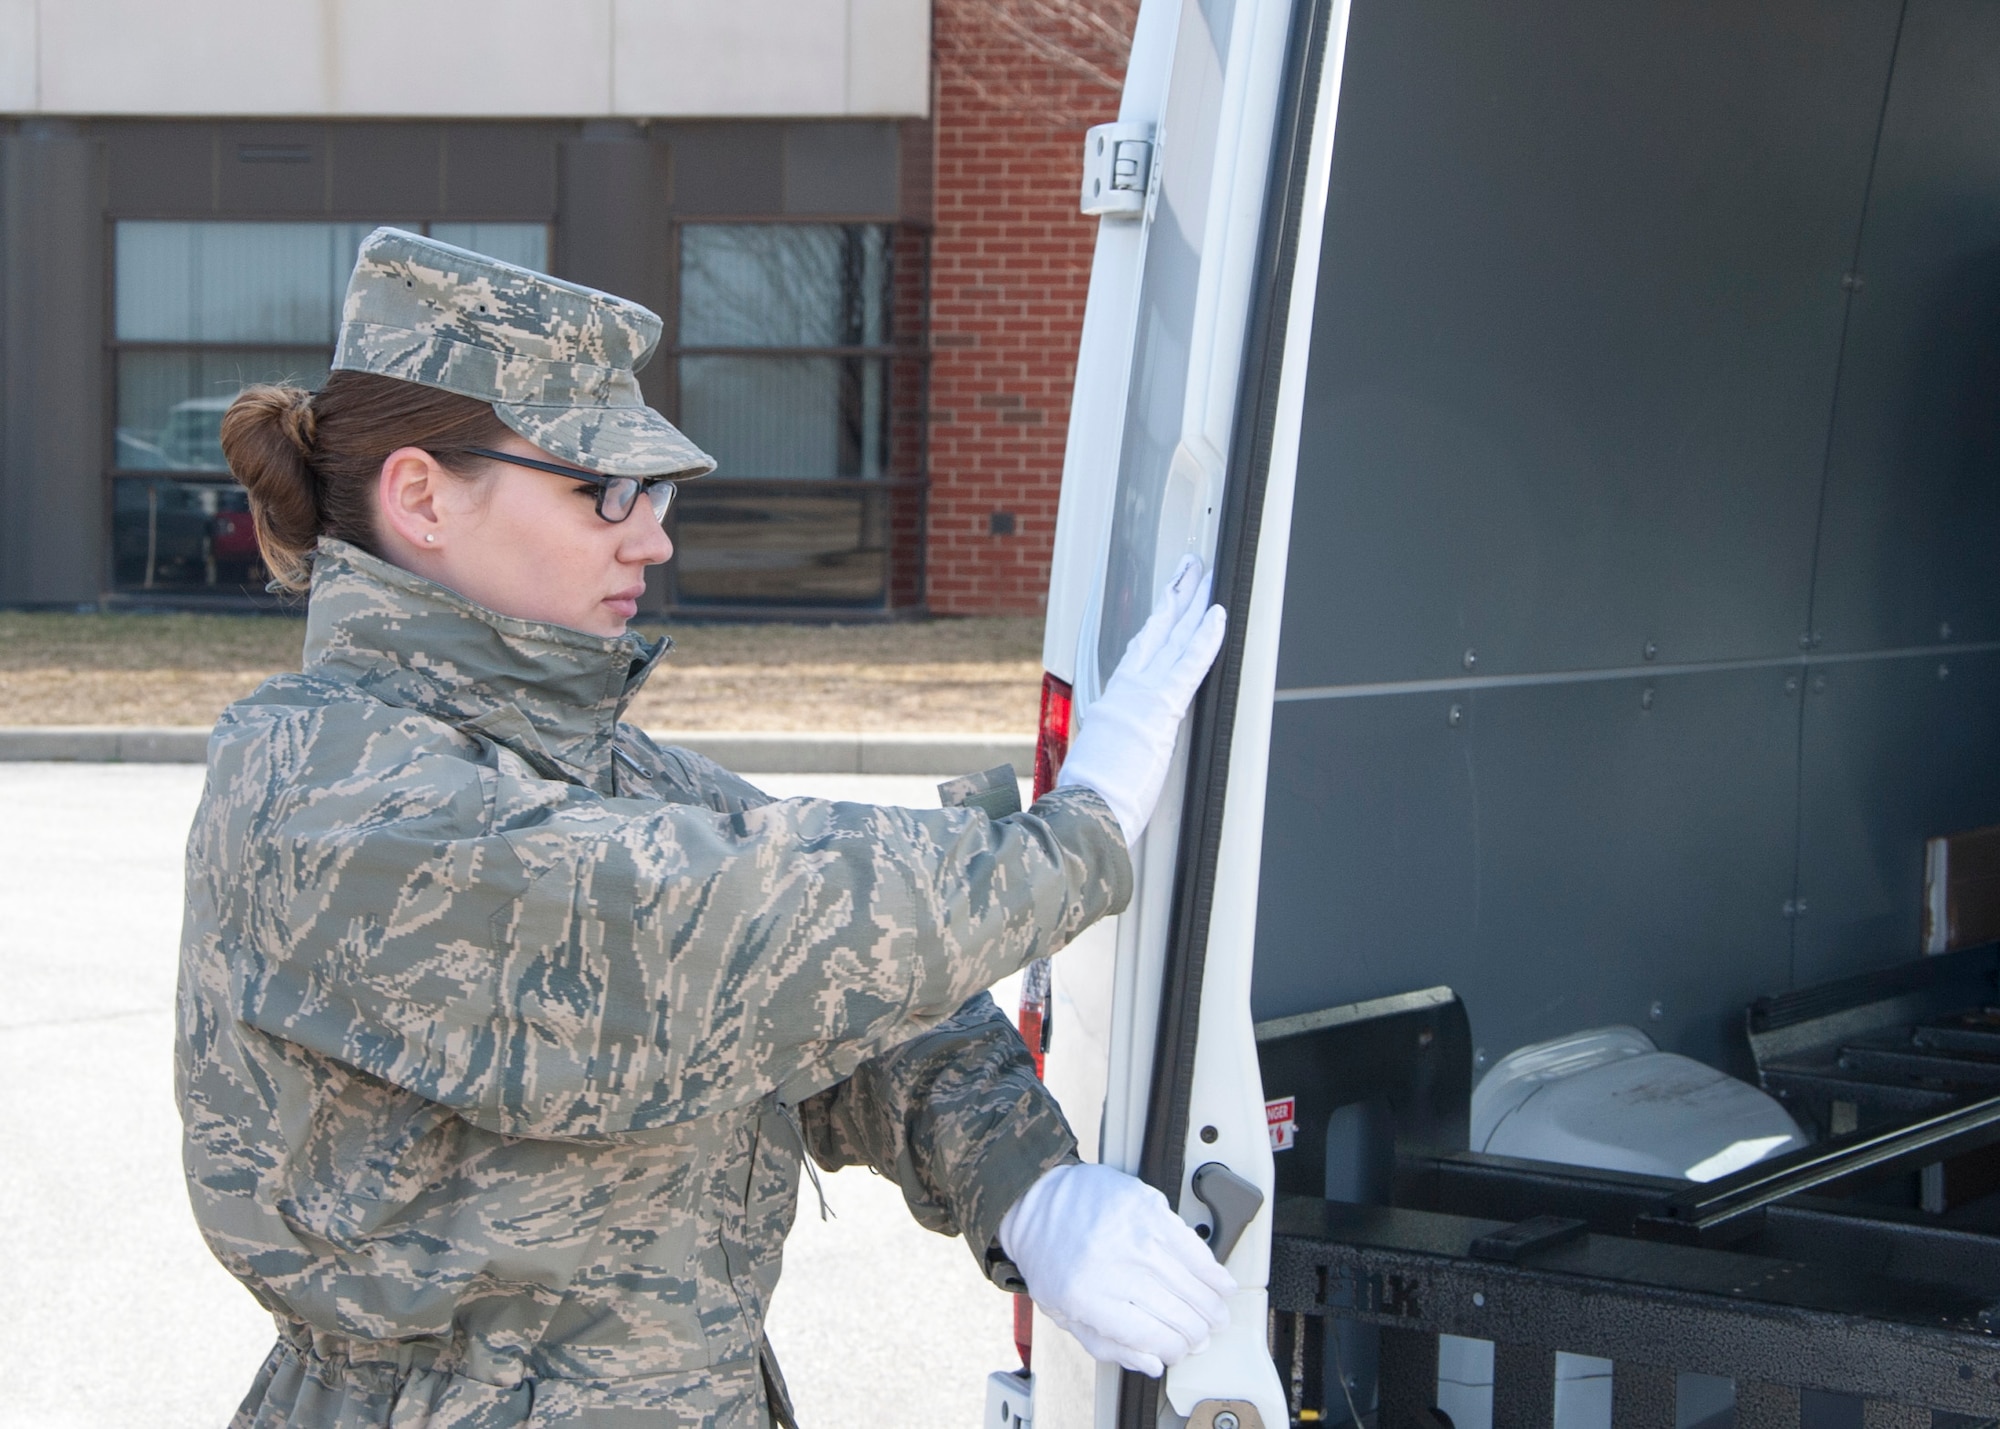 Senior Airman Jamie Debbrecht, a 512th Memorial Affairs Squadron services specialist, practices her role as door guard prior to the start of a dignified transfer divert exercise March 19, 2015, at New Castle Air National Guard Base, Del. Debbrecht is deployed to Air Force Mortuary Affairs Operations from the 512th Memorial Affairs Squadron, Dover Air Force Base, Del. (U.S. Air Force photo/Senior Airman Jared Duhon)